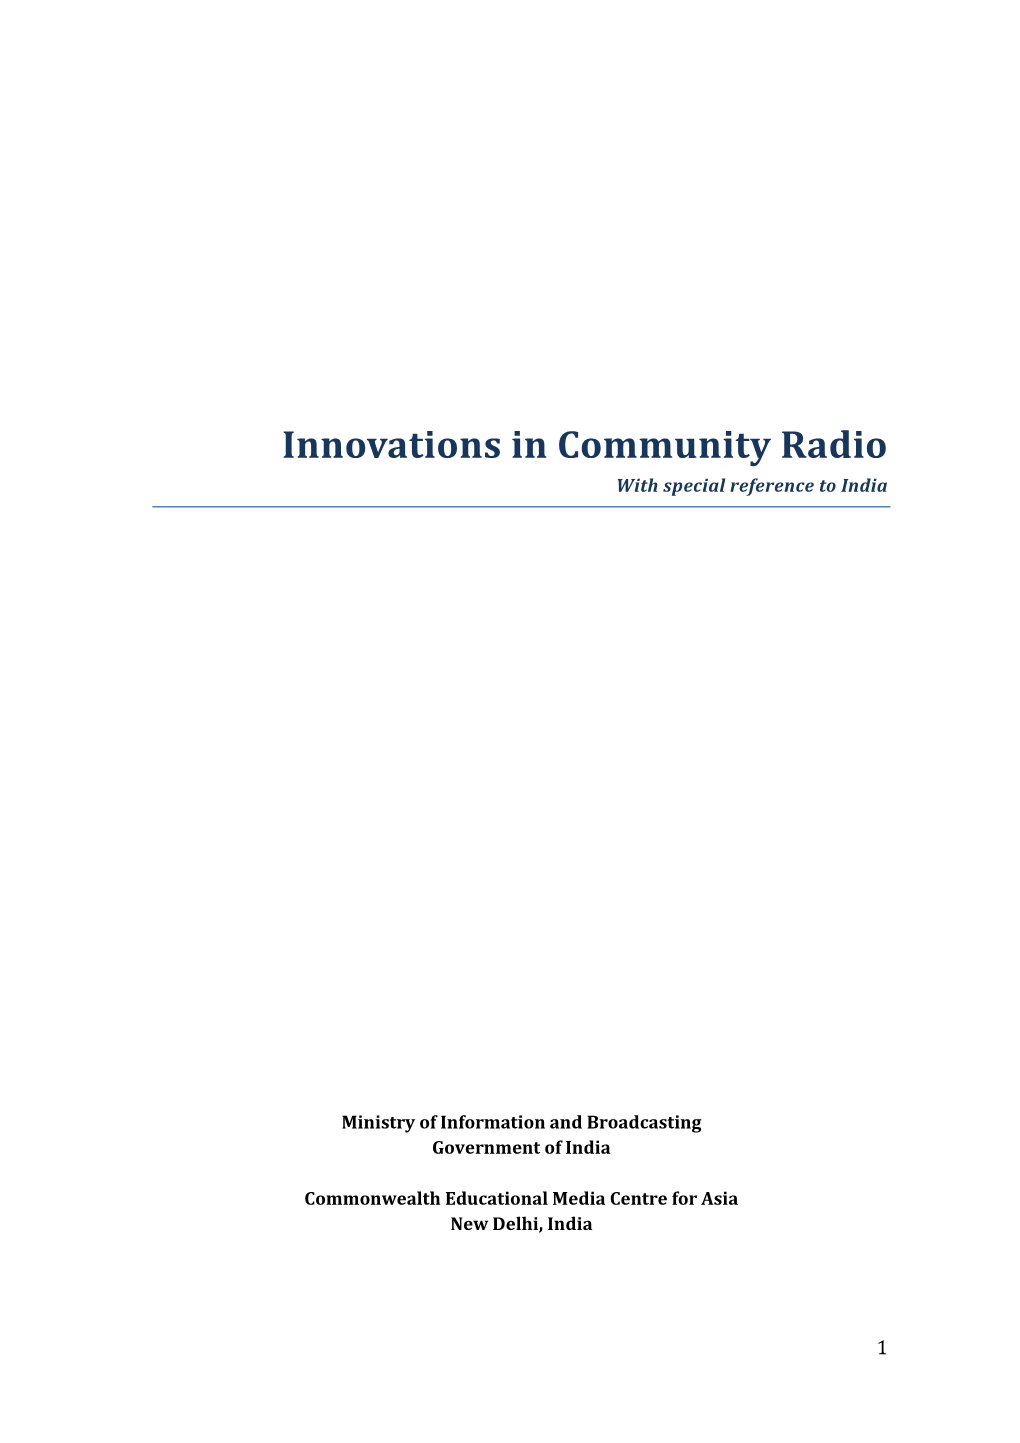 Innovations in Community Radio with Special Reference to India